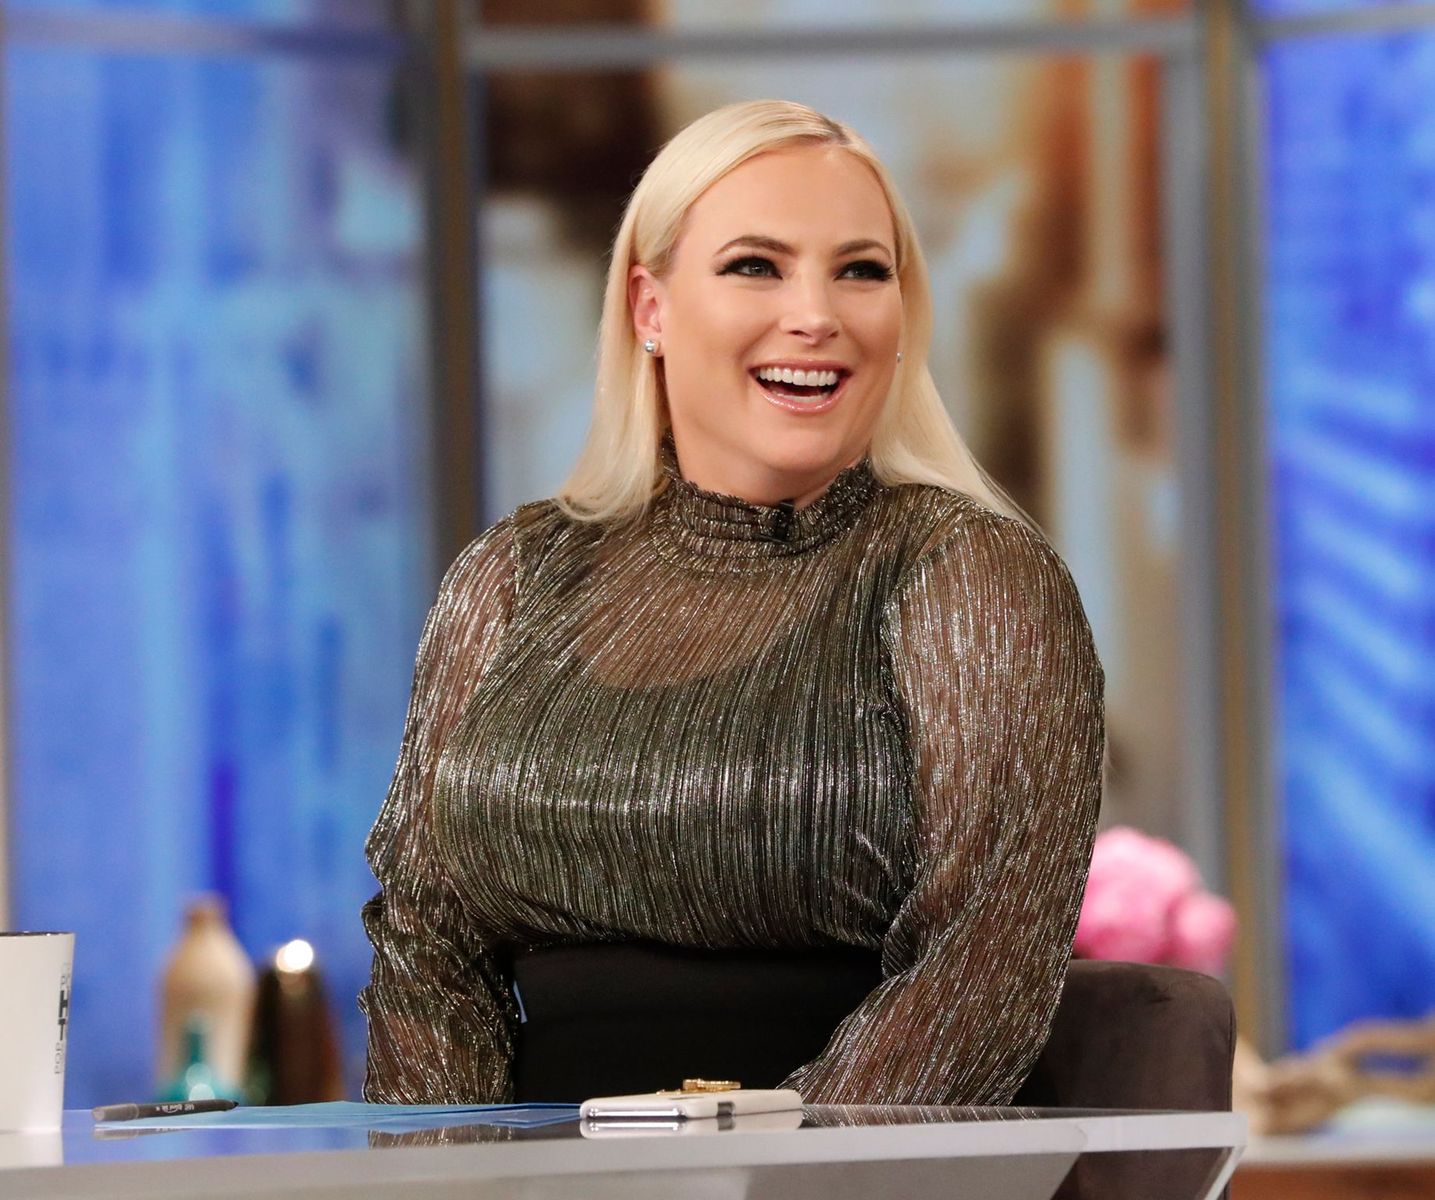 Meghan McCain on the set of "The View" on May 15, 2019 | Photo: Lou Rocco/Walt Disney Television/Getty Images